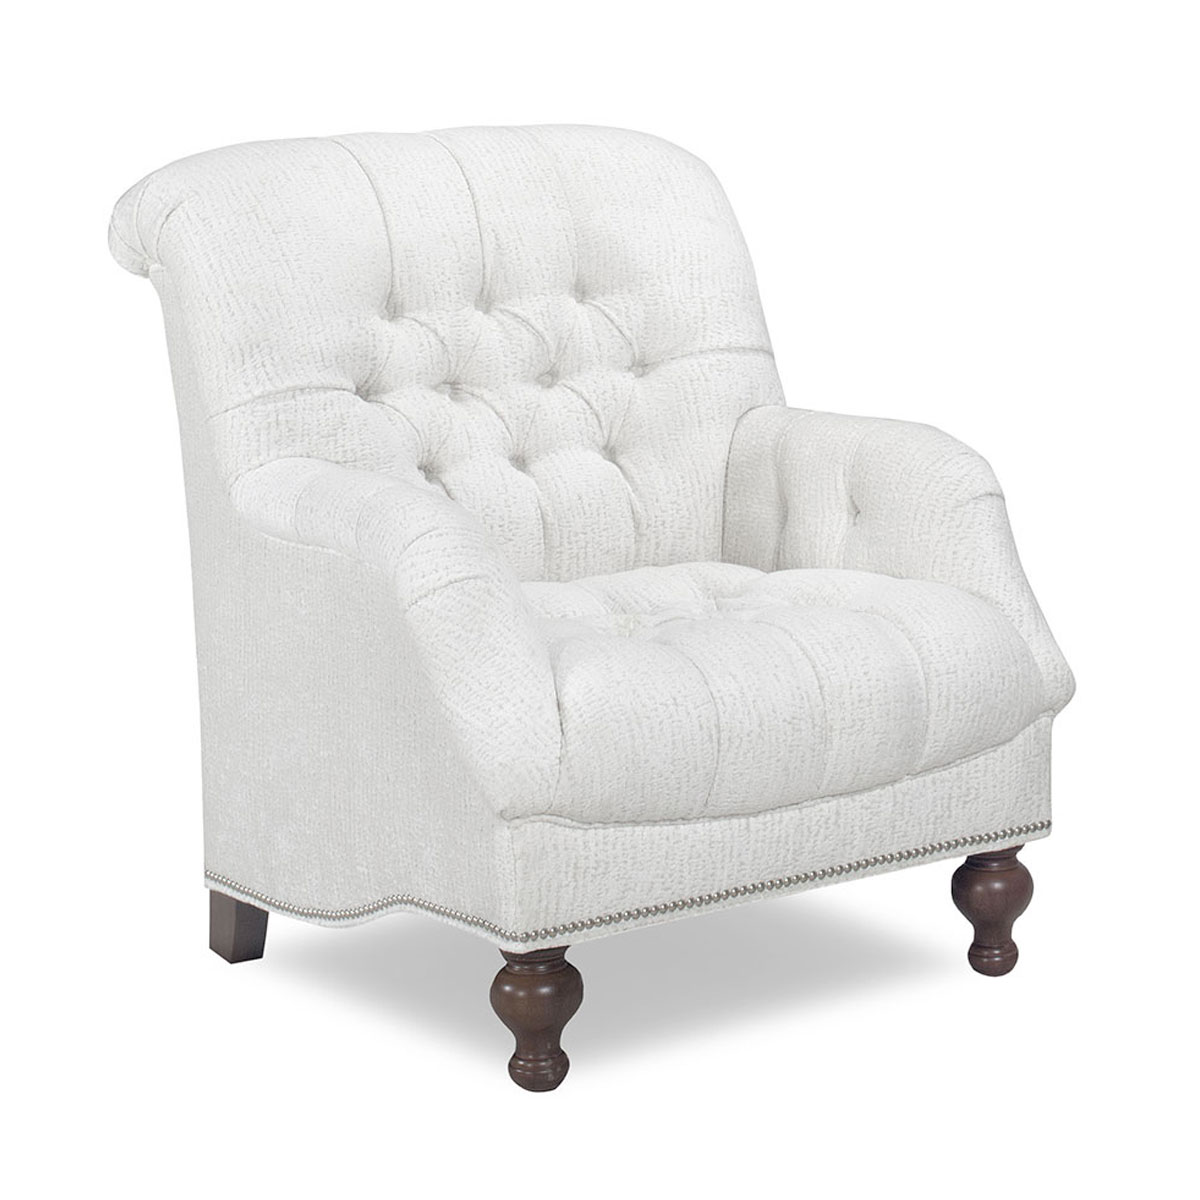 Temple Furniture 28815 Nelle Lounge Chair